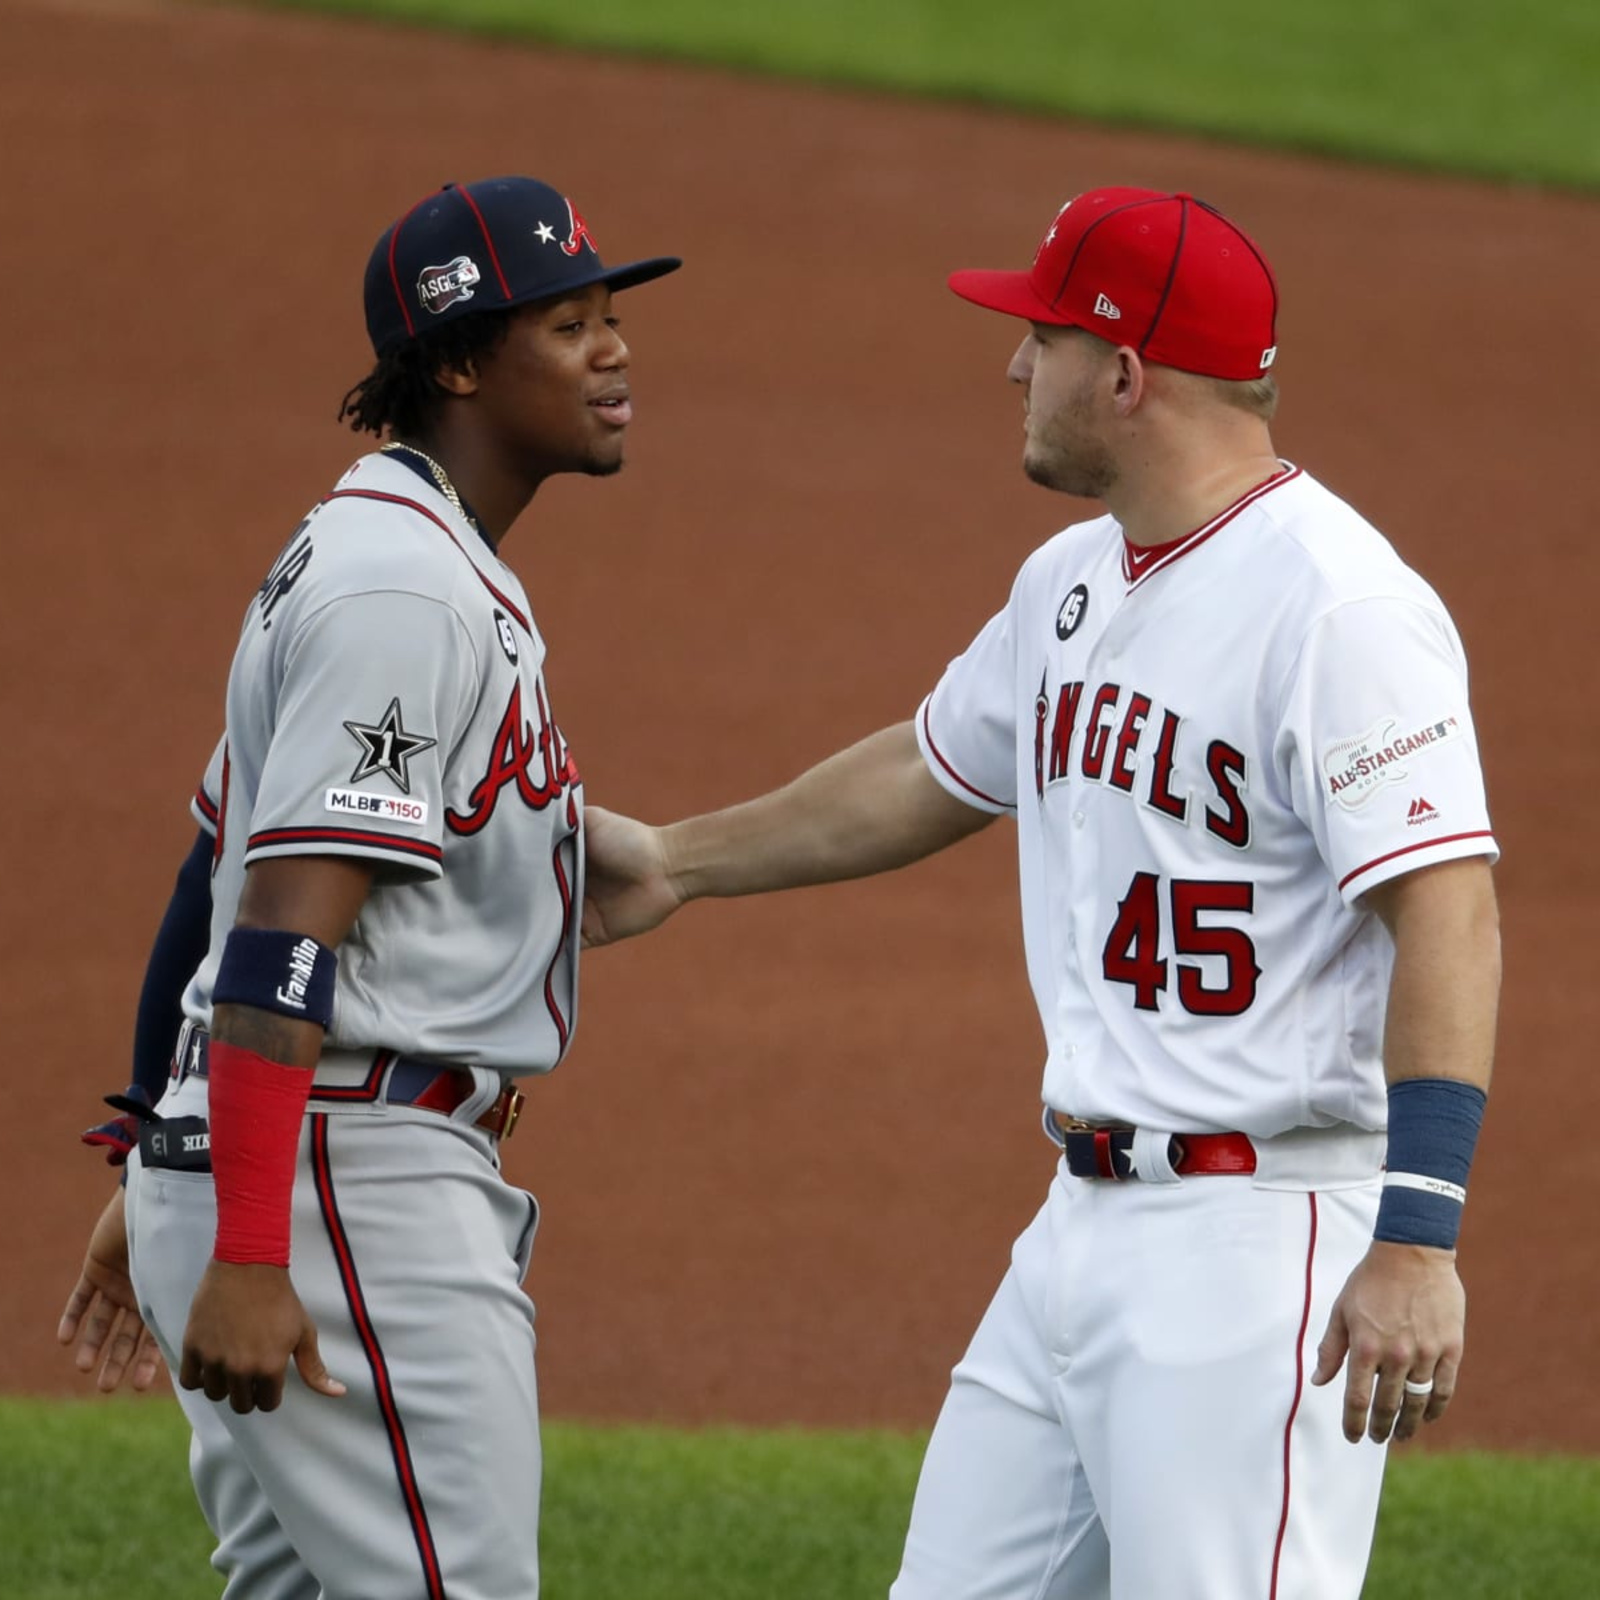 MLB All-Star Game 2023 injury replacements for Trout, Judge, Kershaw